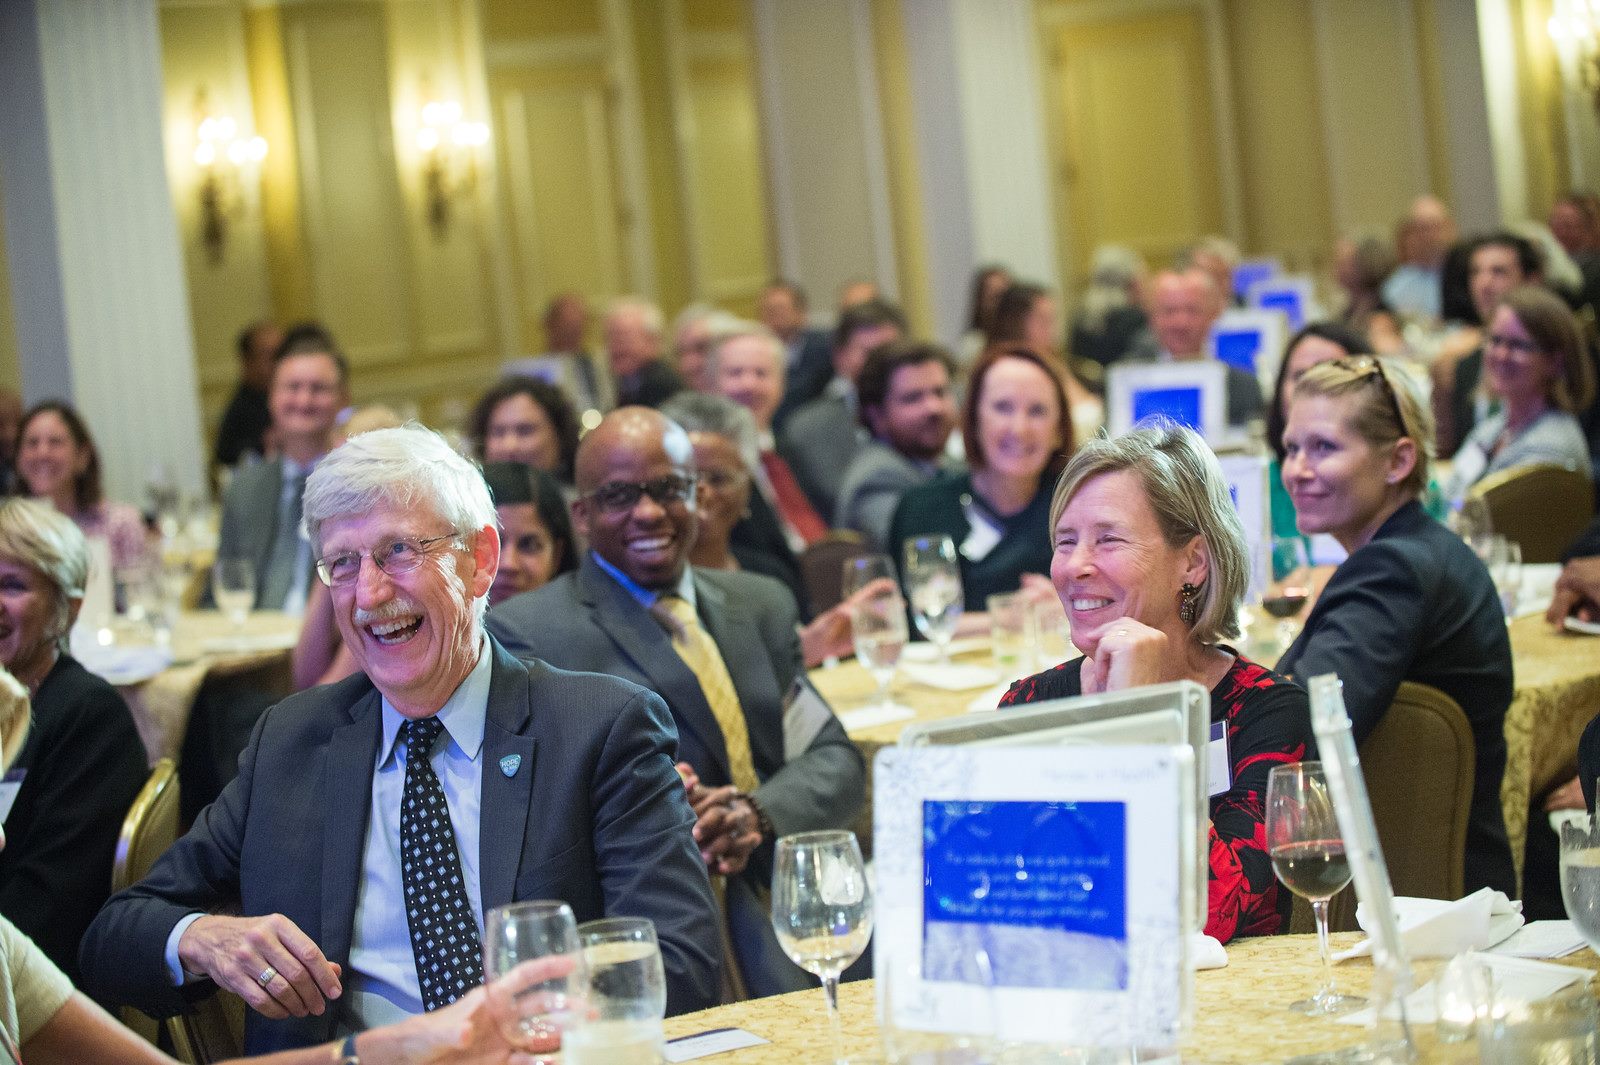 Dr. Francis Collins laughing along with guests in the audience.